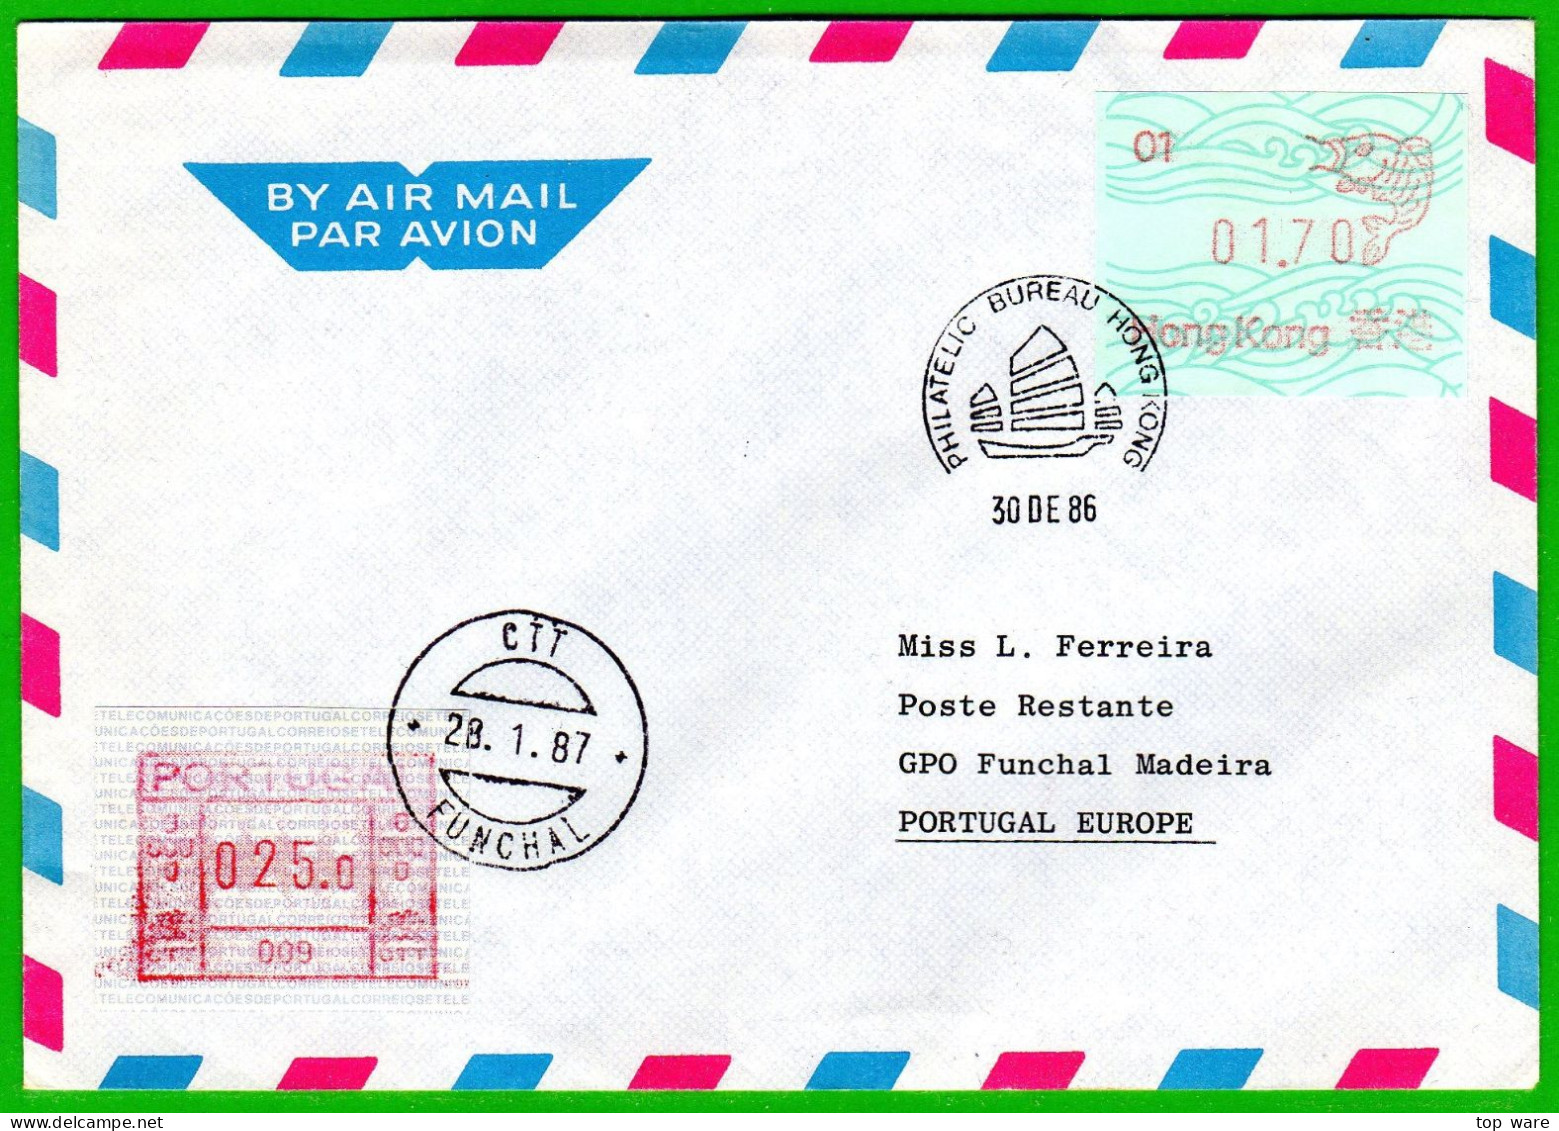 Hong Kong China ATM 1 Brown-red / Carp Fish / FDC 1.70 Poste Restante 30 DE 86 To Portugal 25$0 Funchal 28.1.86 / Frama - Distribuidores